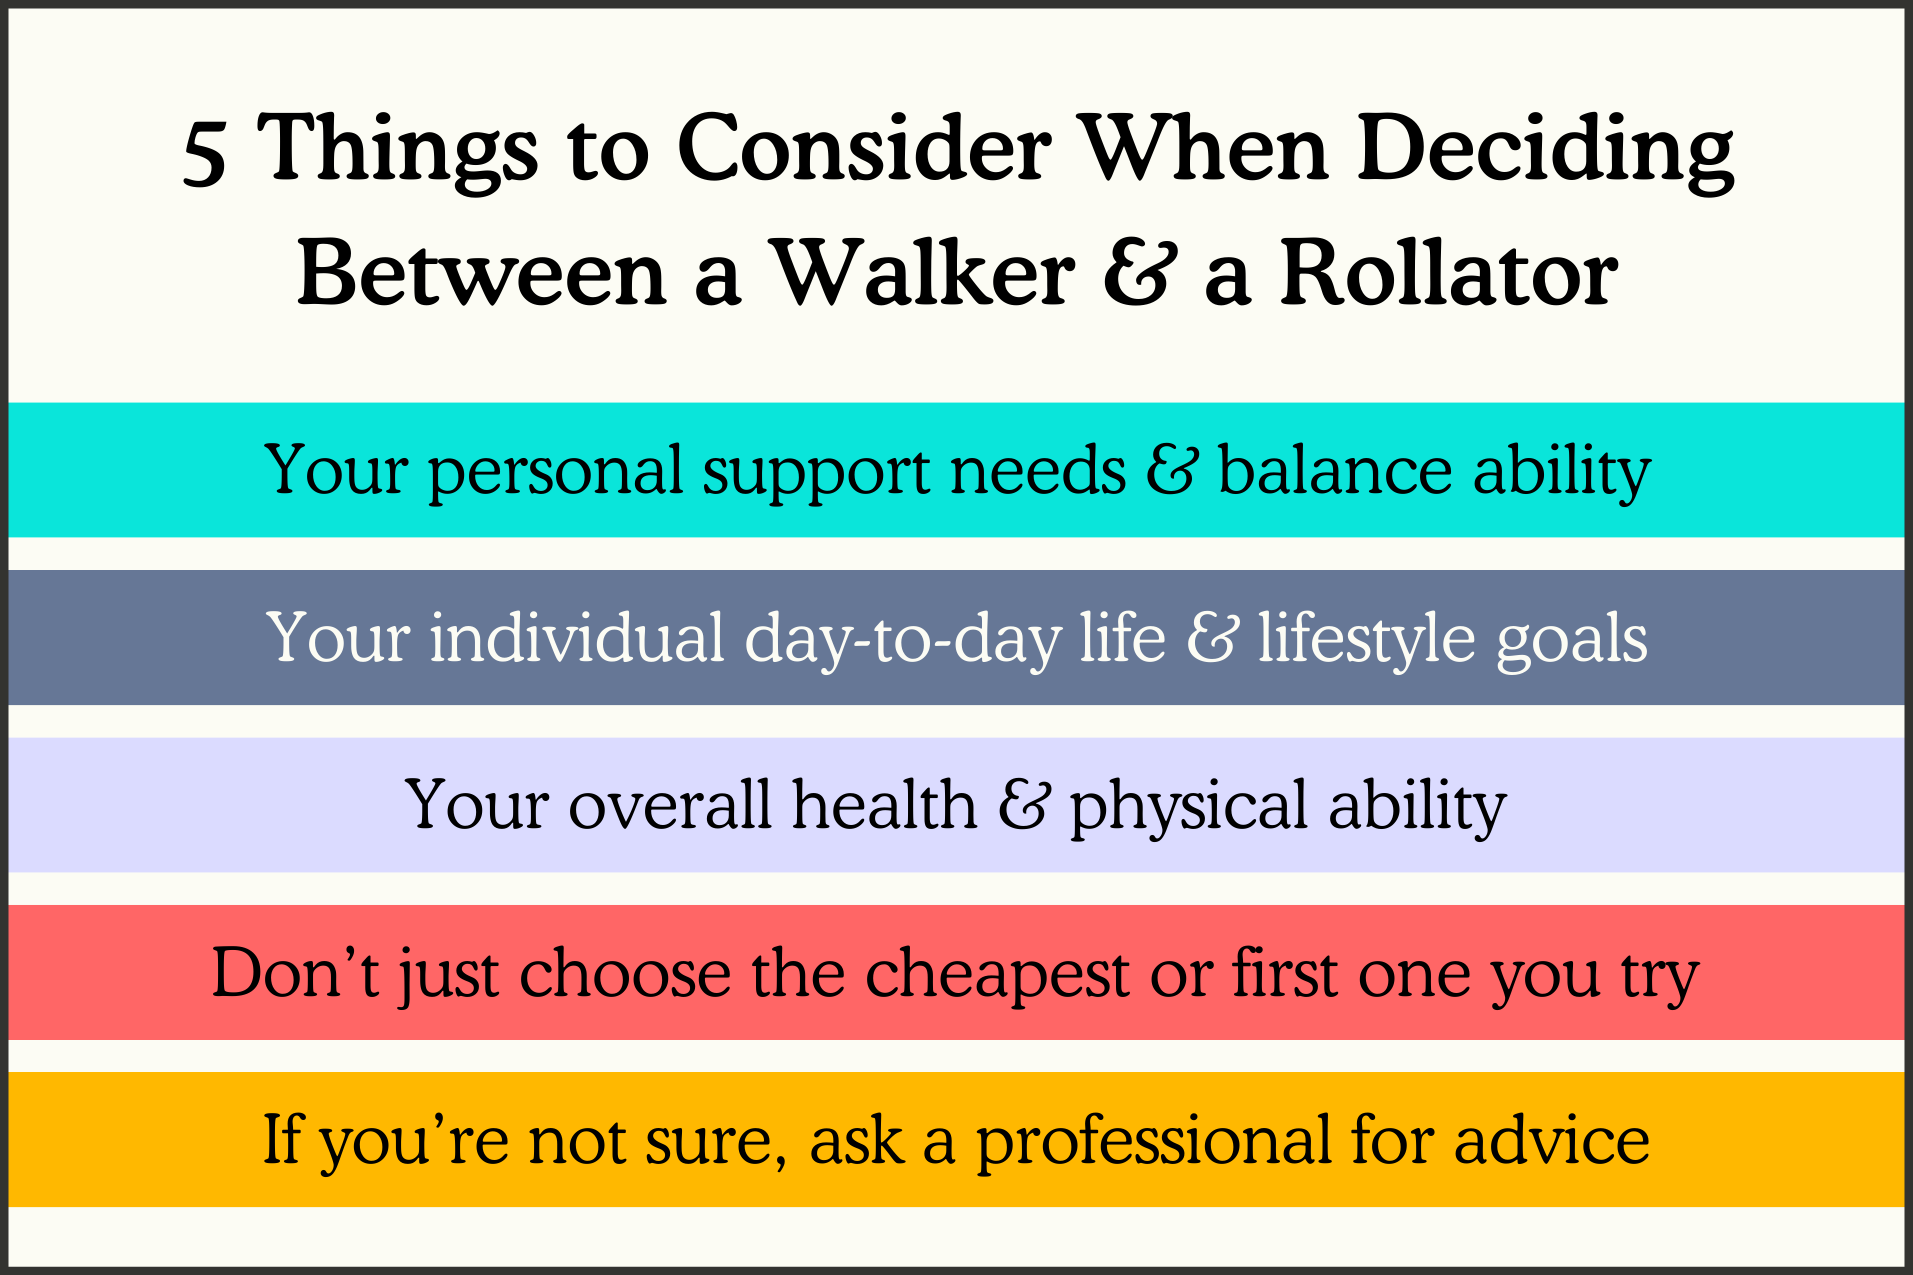 A graphic listing 5 things to consider when deciding between a walker and a rollator walker.